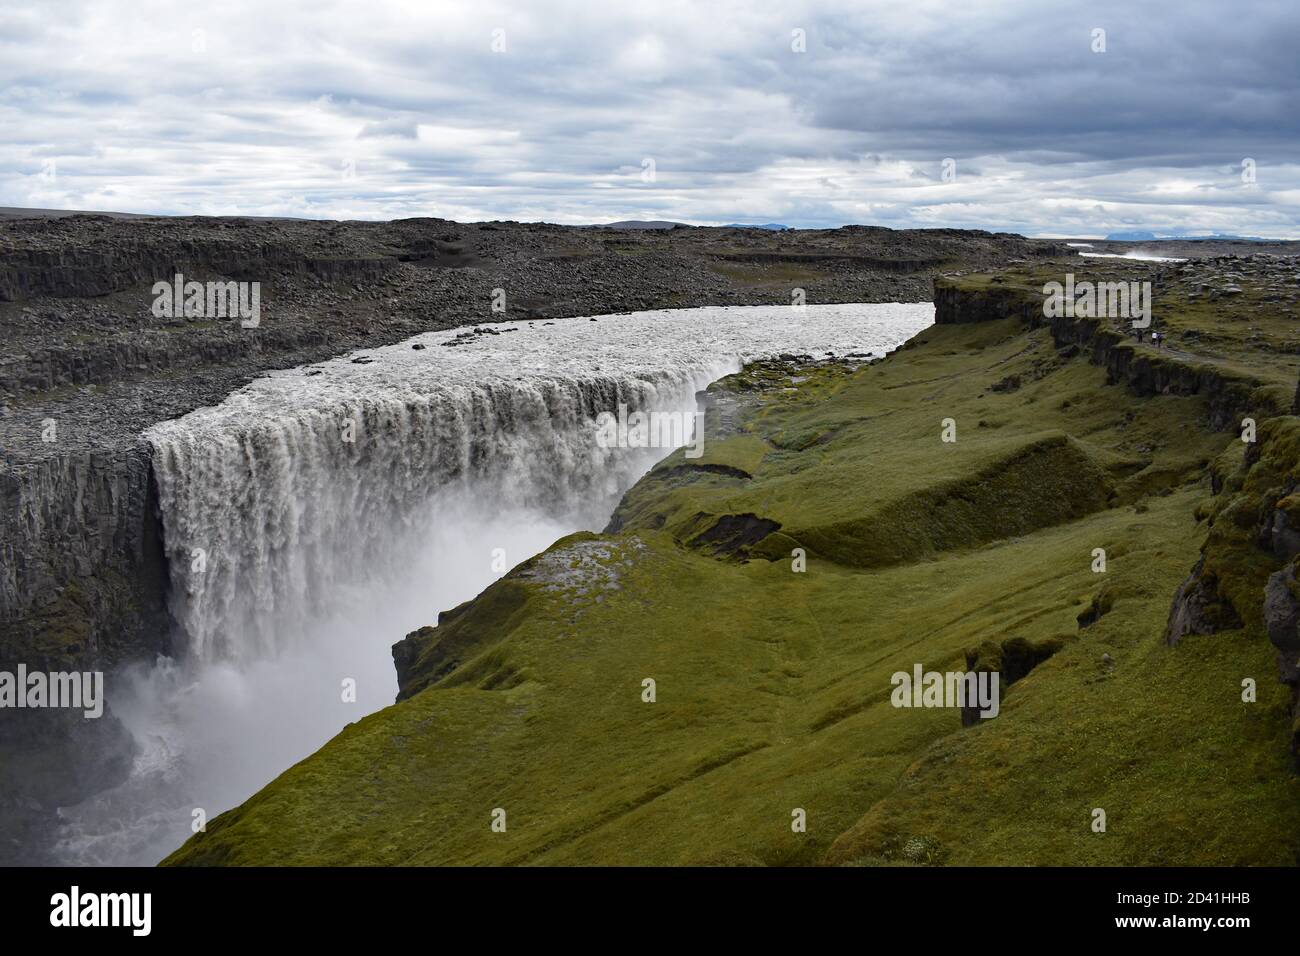 A view of Dettifoss Waterfall in Northeast Iceland. The green eastern side of the canyon contrasts grey and barren western side and rushing grey water. Stock Photo